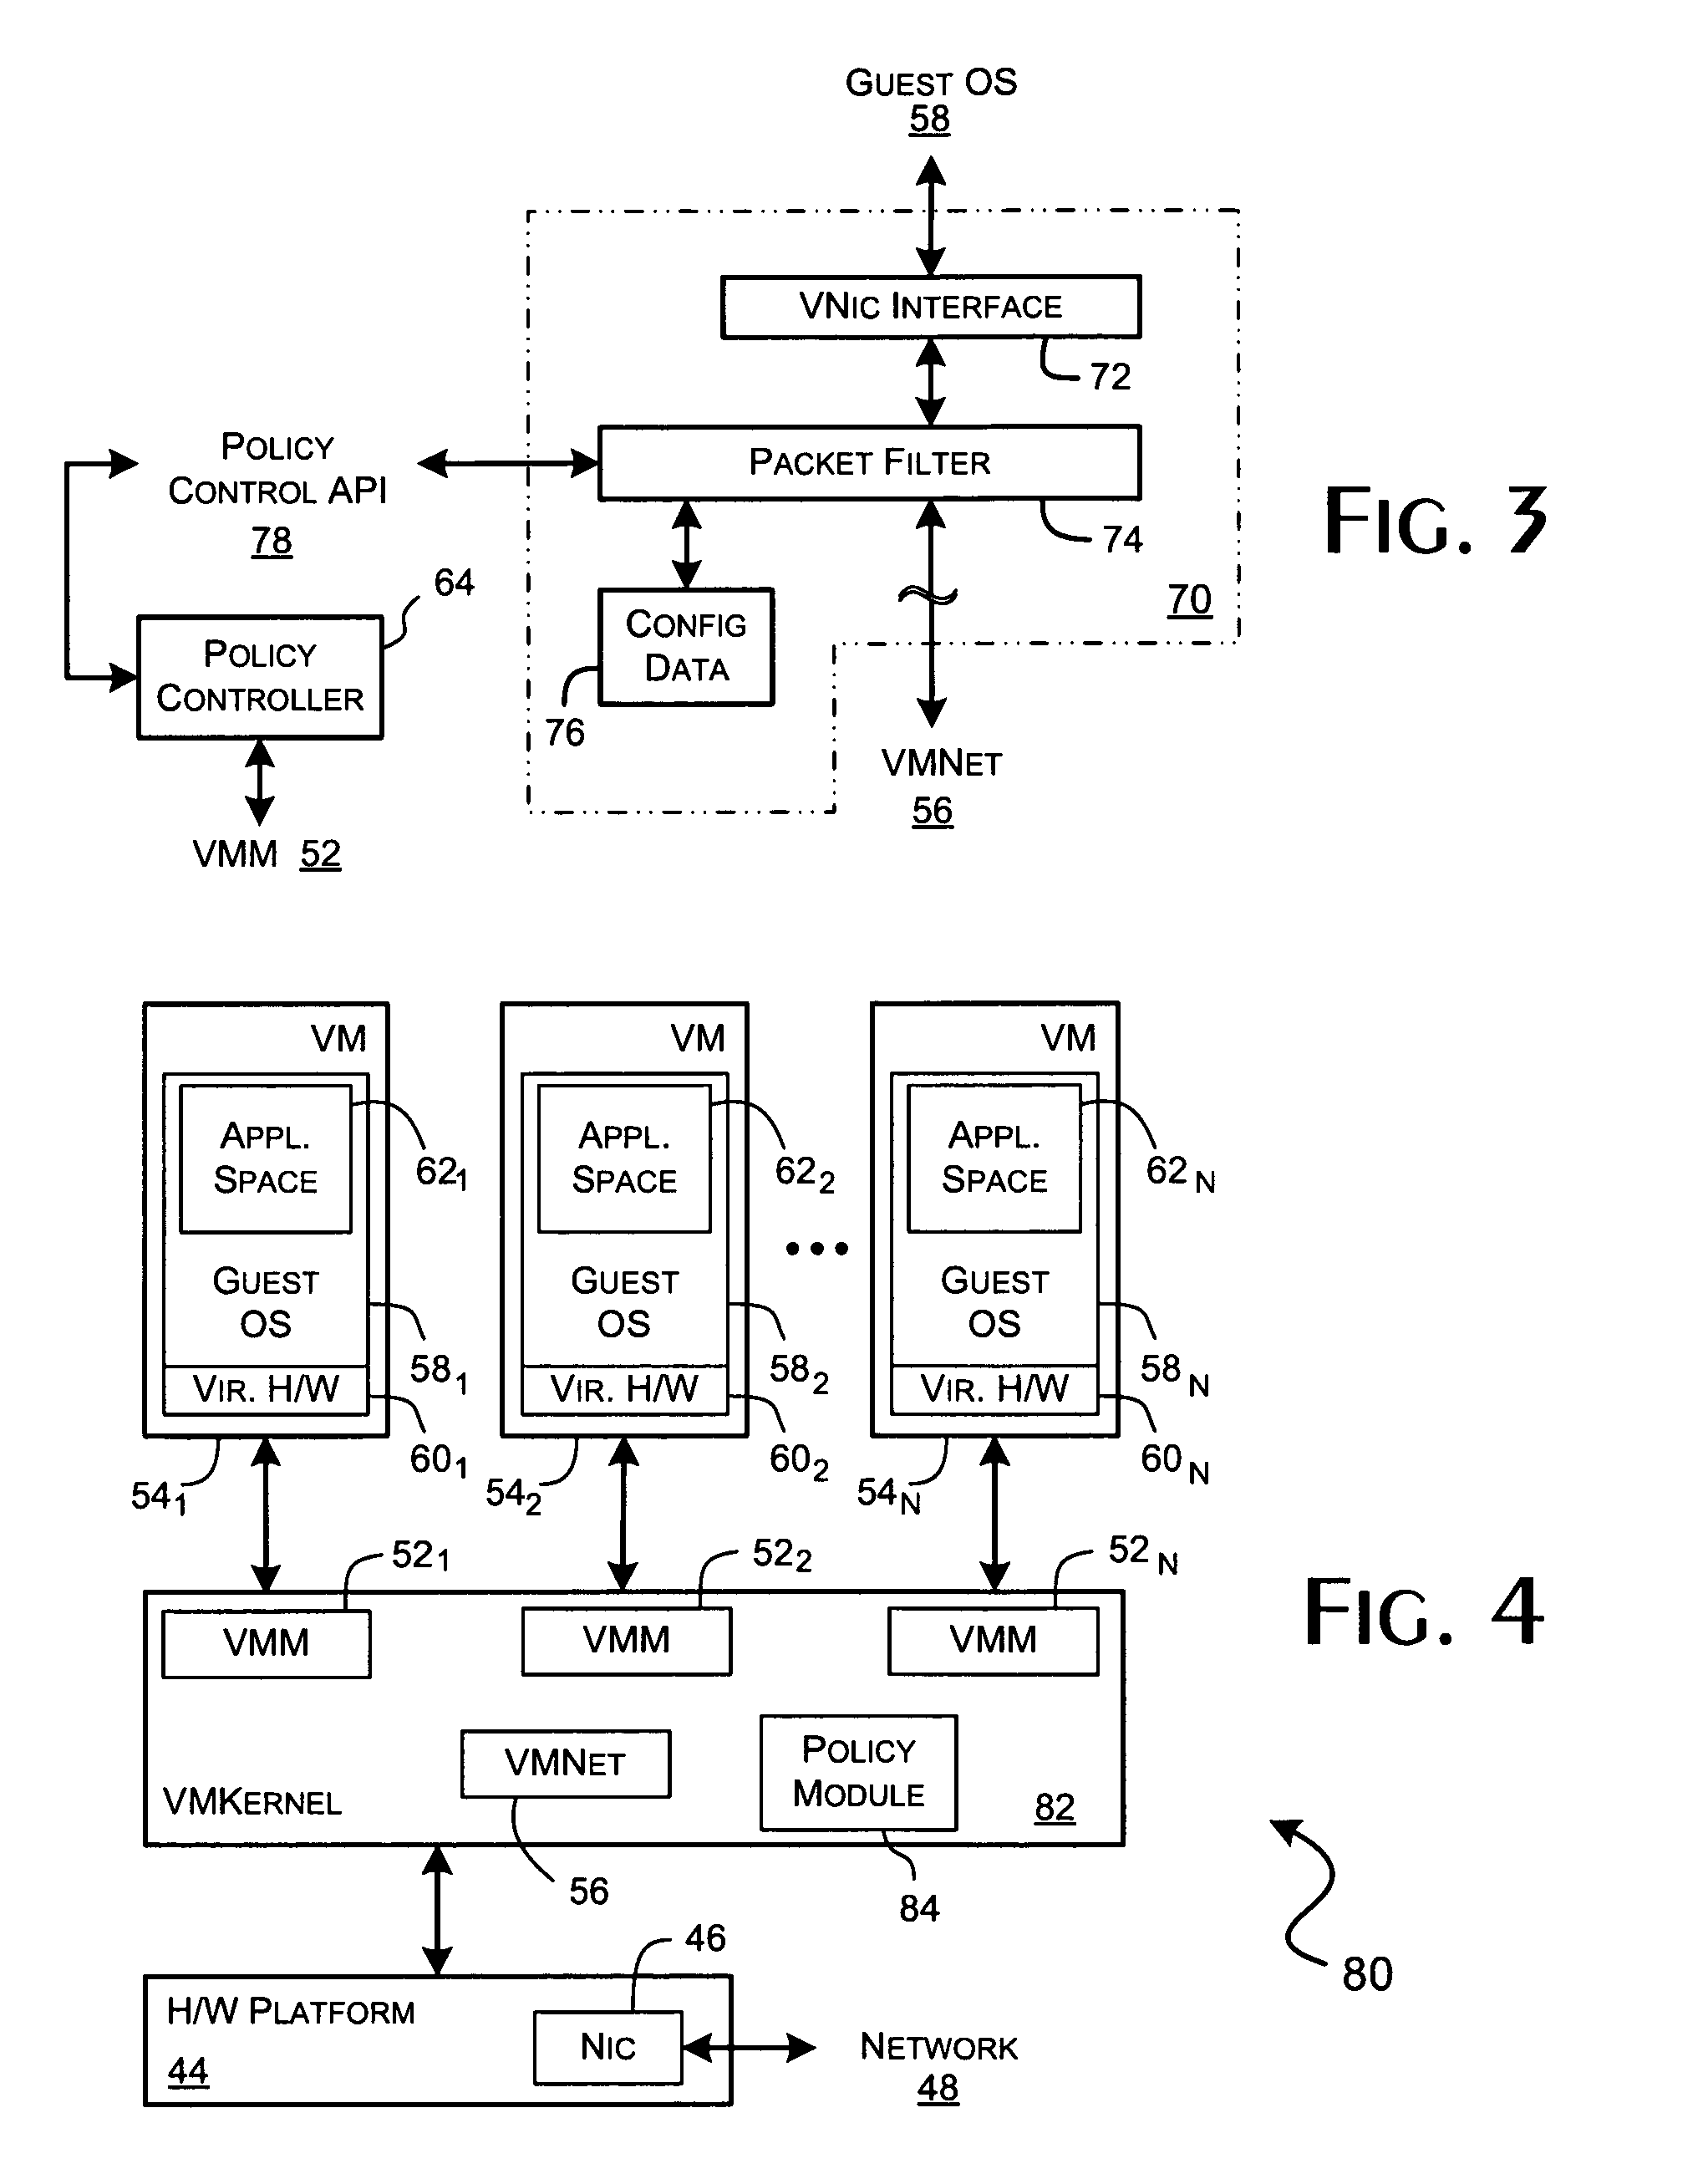 System and methods for implementing network traffic management for virtual and physical machines